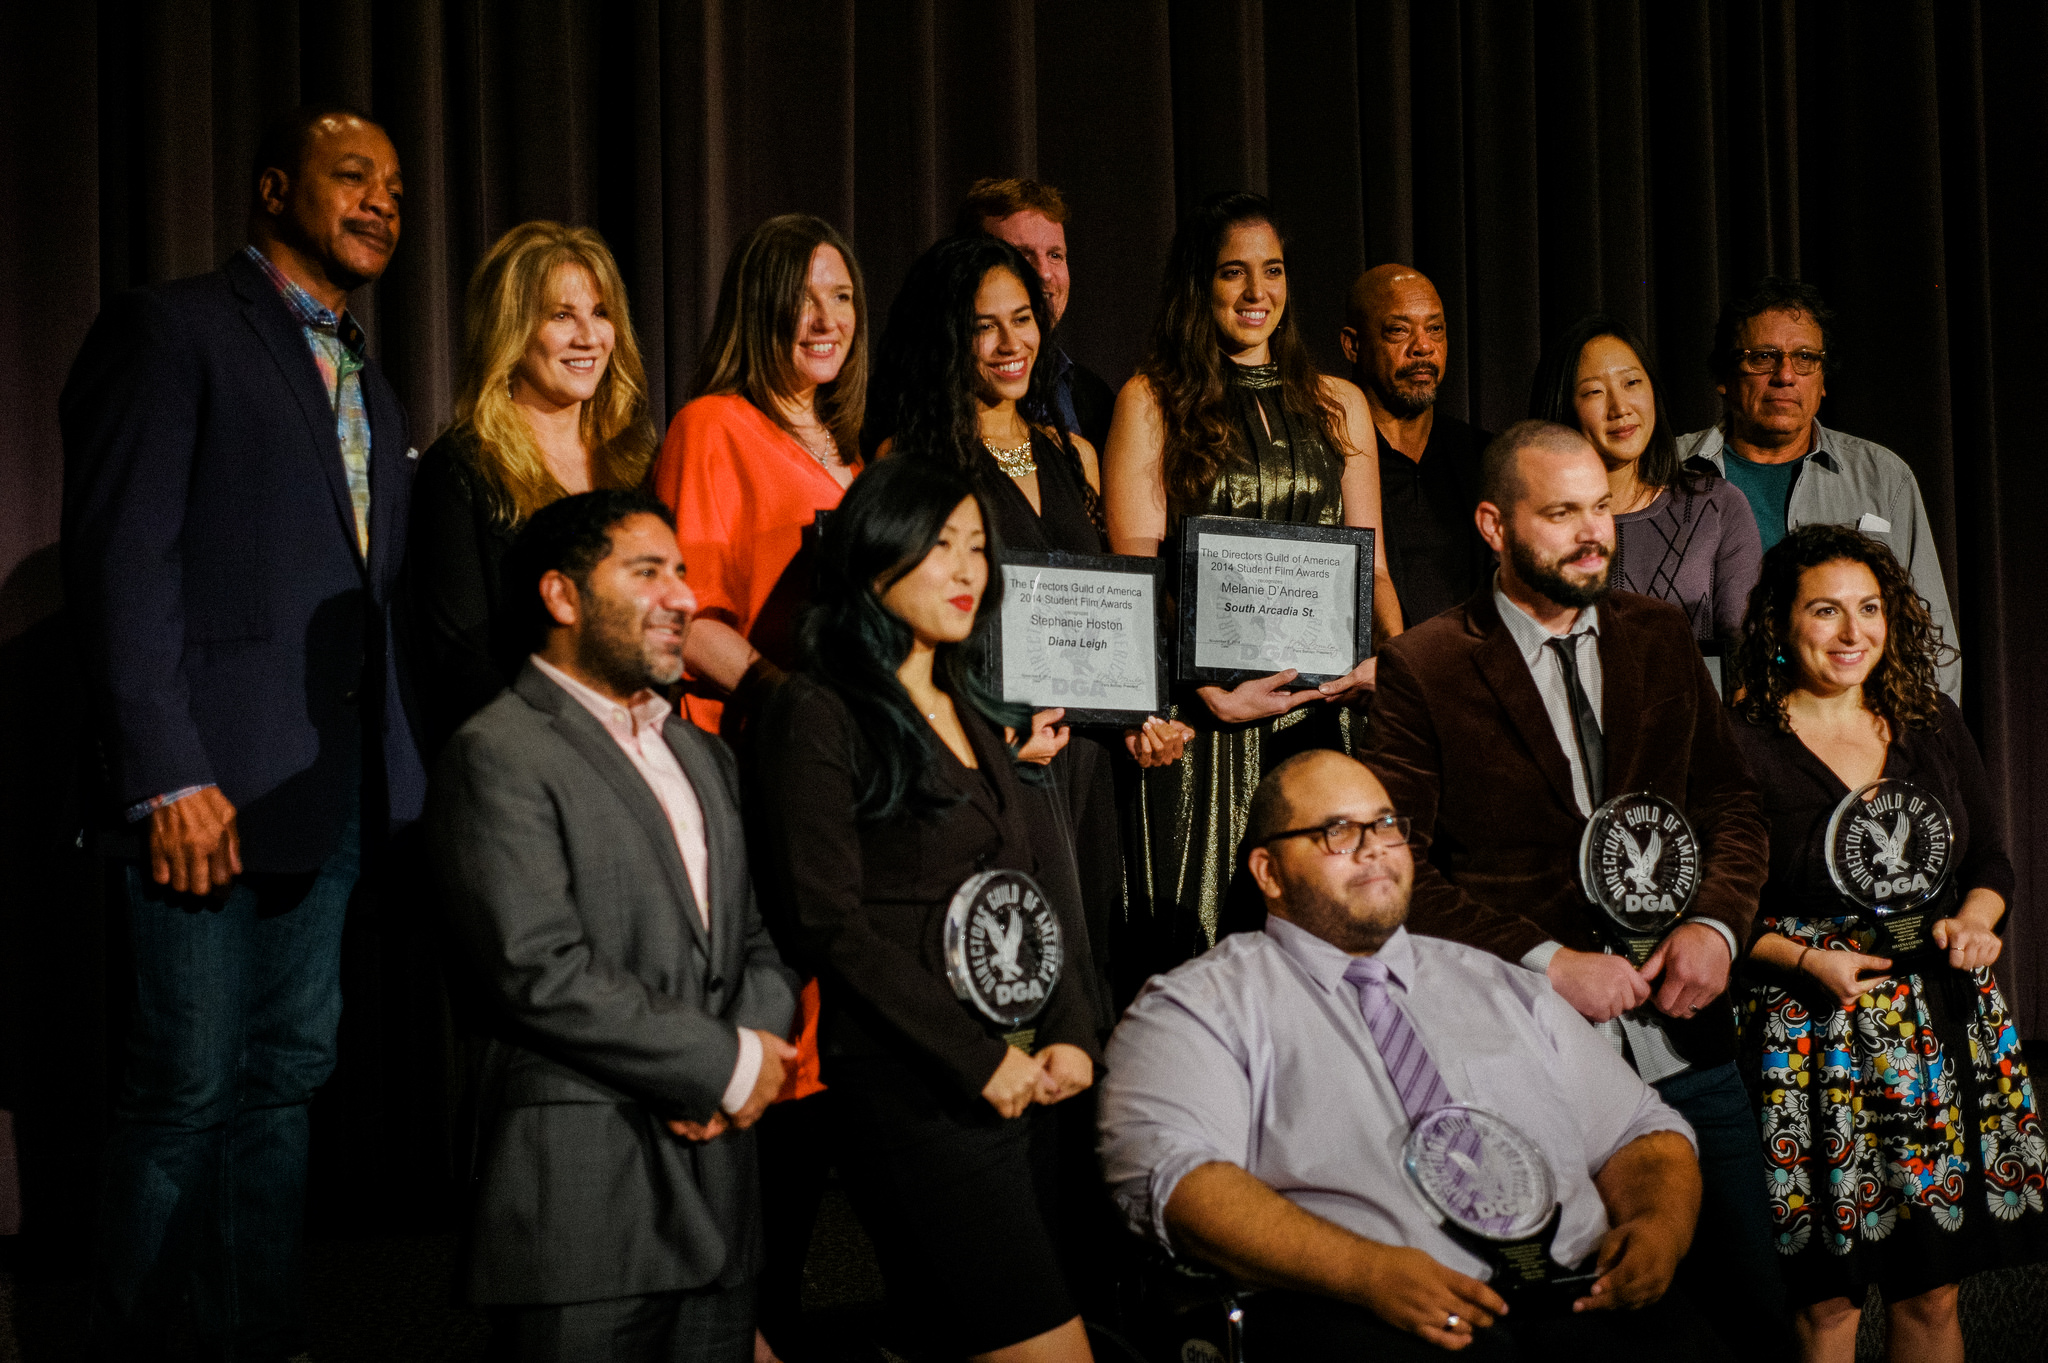 DGA Award Winners and Hosts at the 2014 Western Region Awards Ceremony.